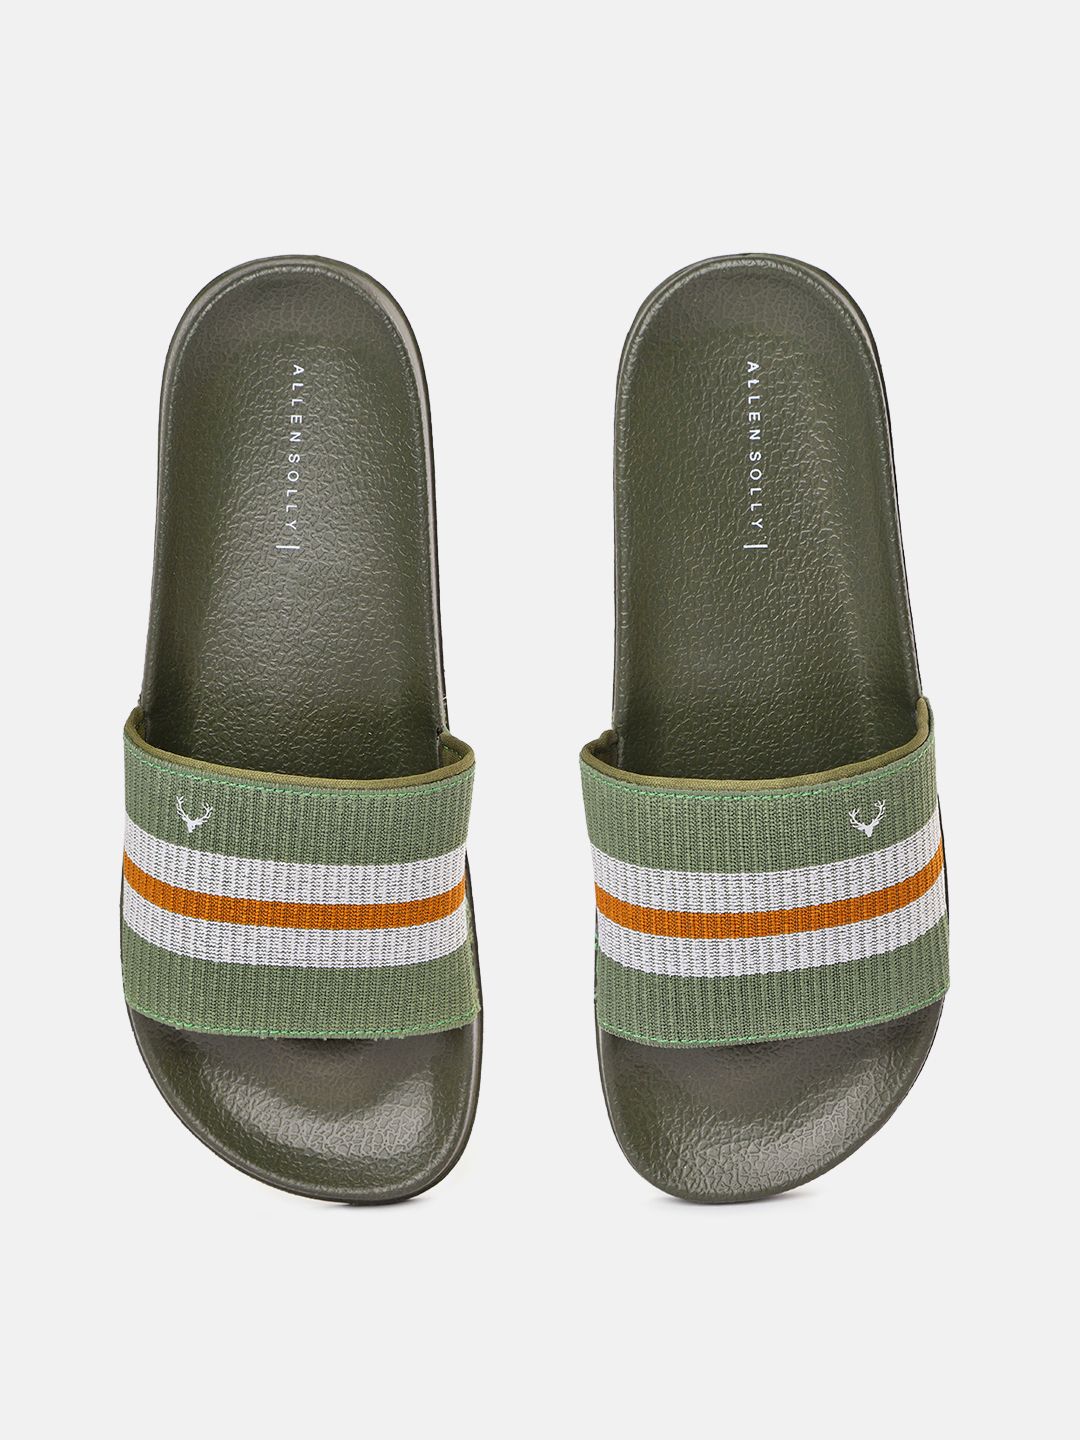 Allen Solly Women Olive Green & White Striped Sliders Price in India